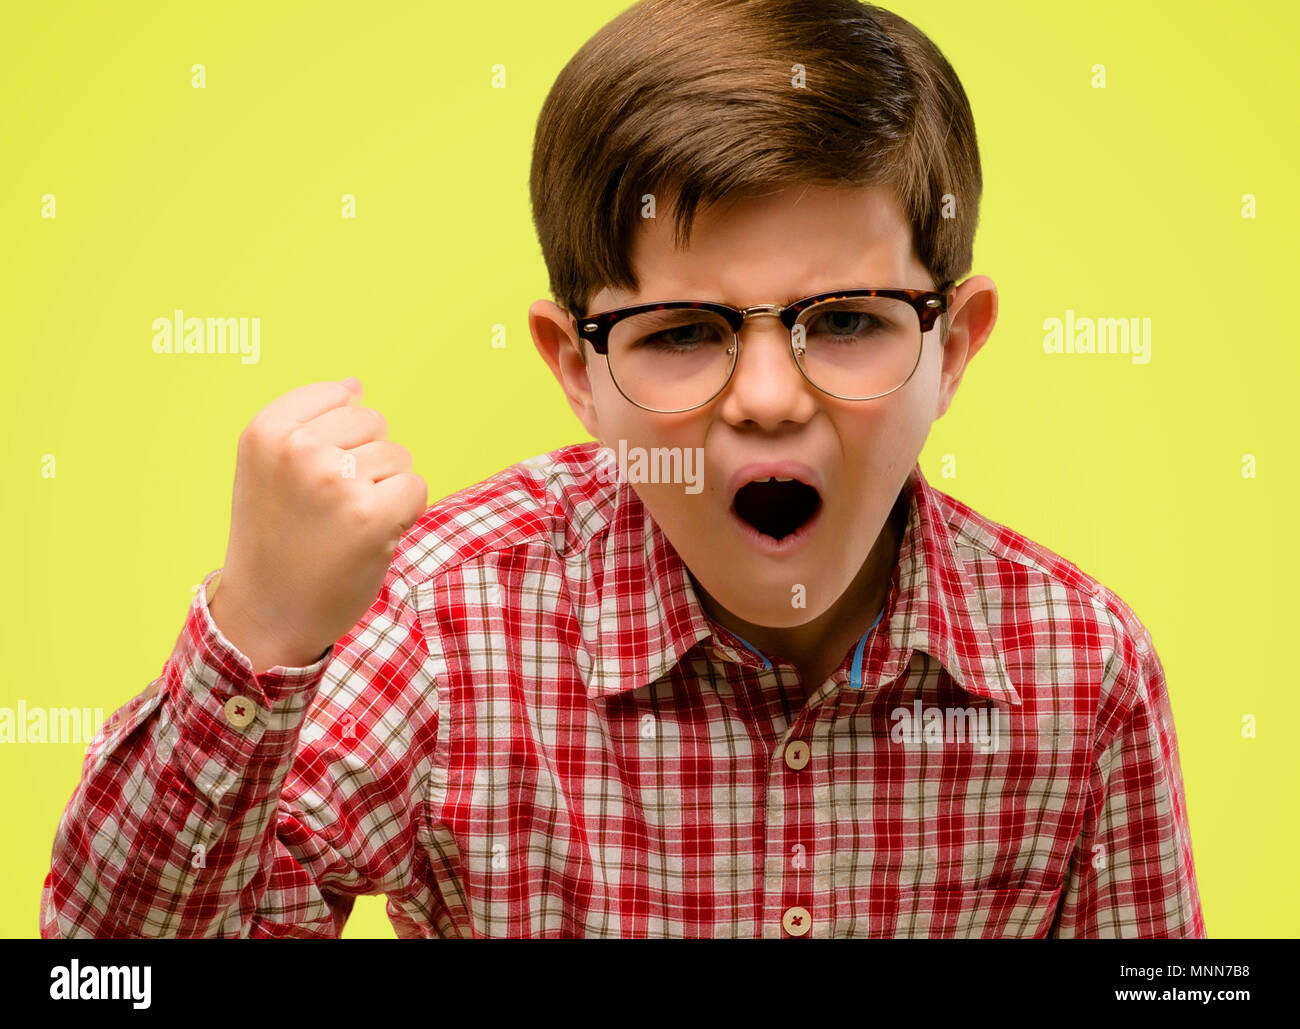 Handsome toddler child with green eyes irritated and angry expressing negative emotion, annoyed with someone over yellow background Stock Photo